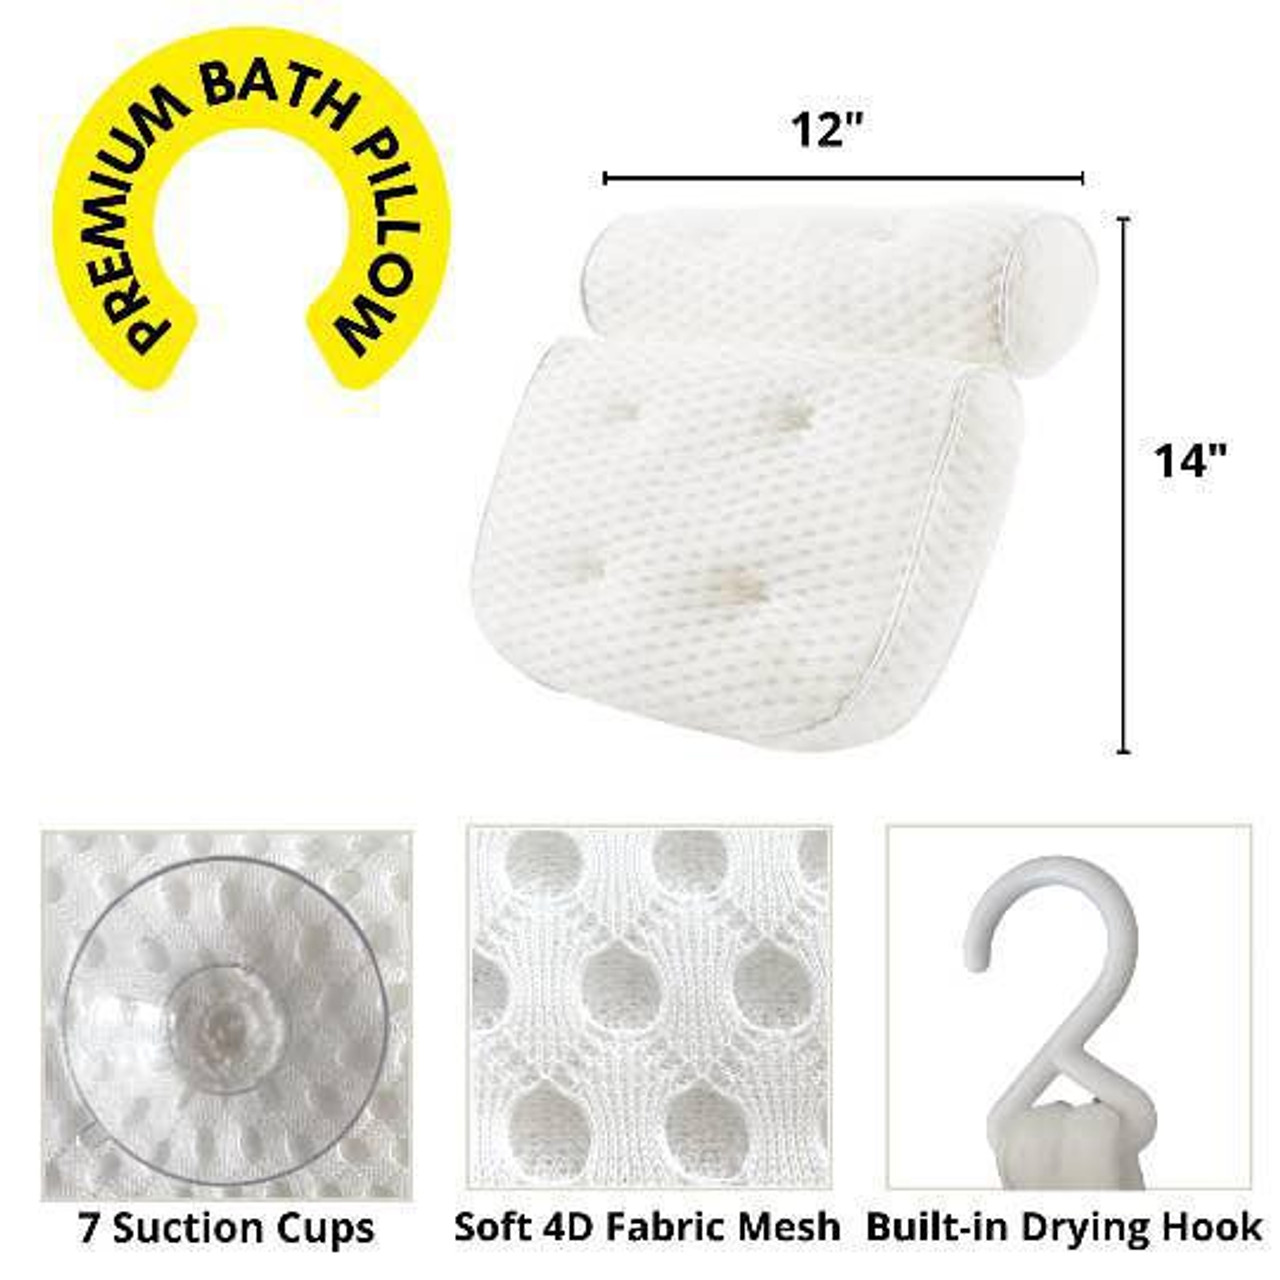  Efforest Bath Pillows for Tub Neck and Back Support